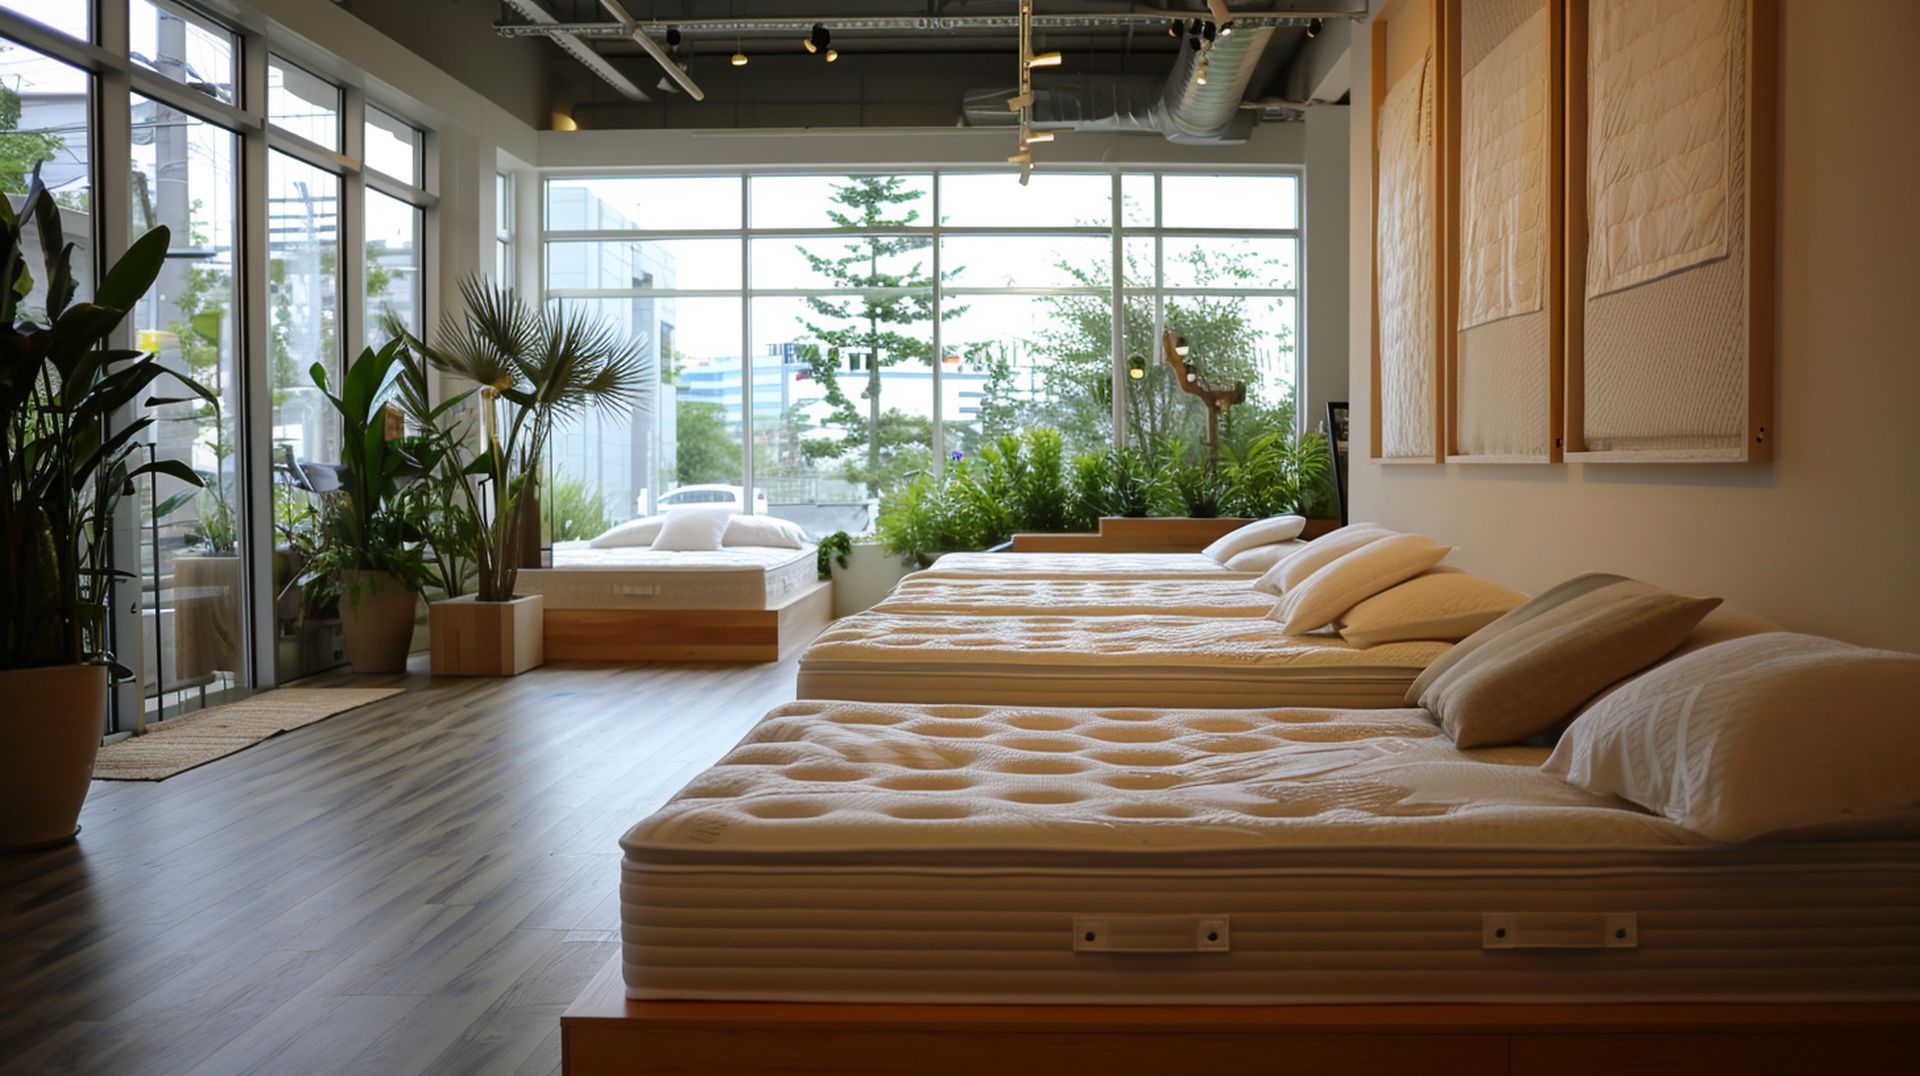 Types of mattresses at mattress dealers in Newton, MA